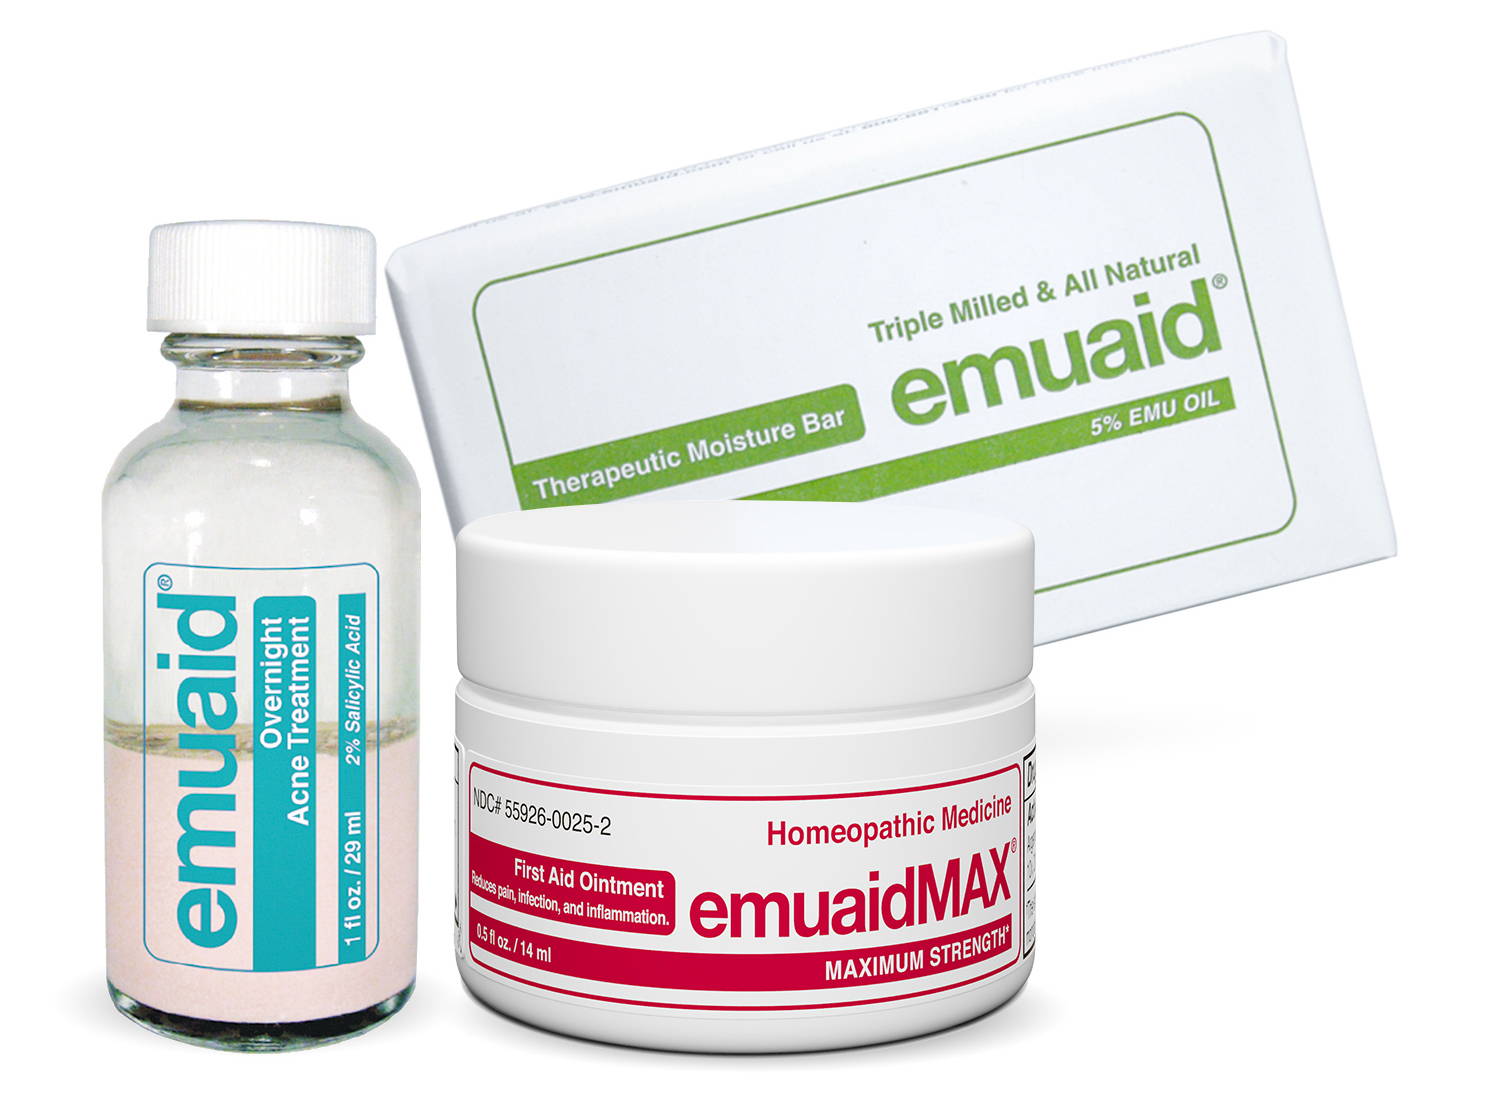 A picture of Emuaidmax 0.5oz, Therapeutic Moisture Bar and Overnight Acne Treatment